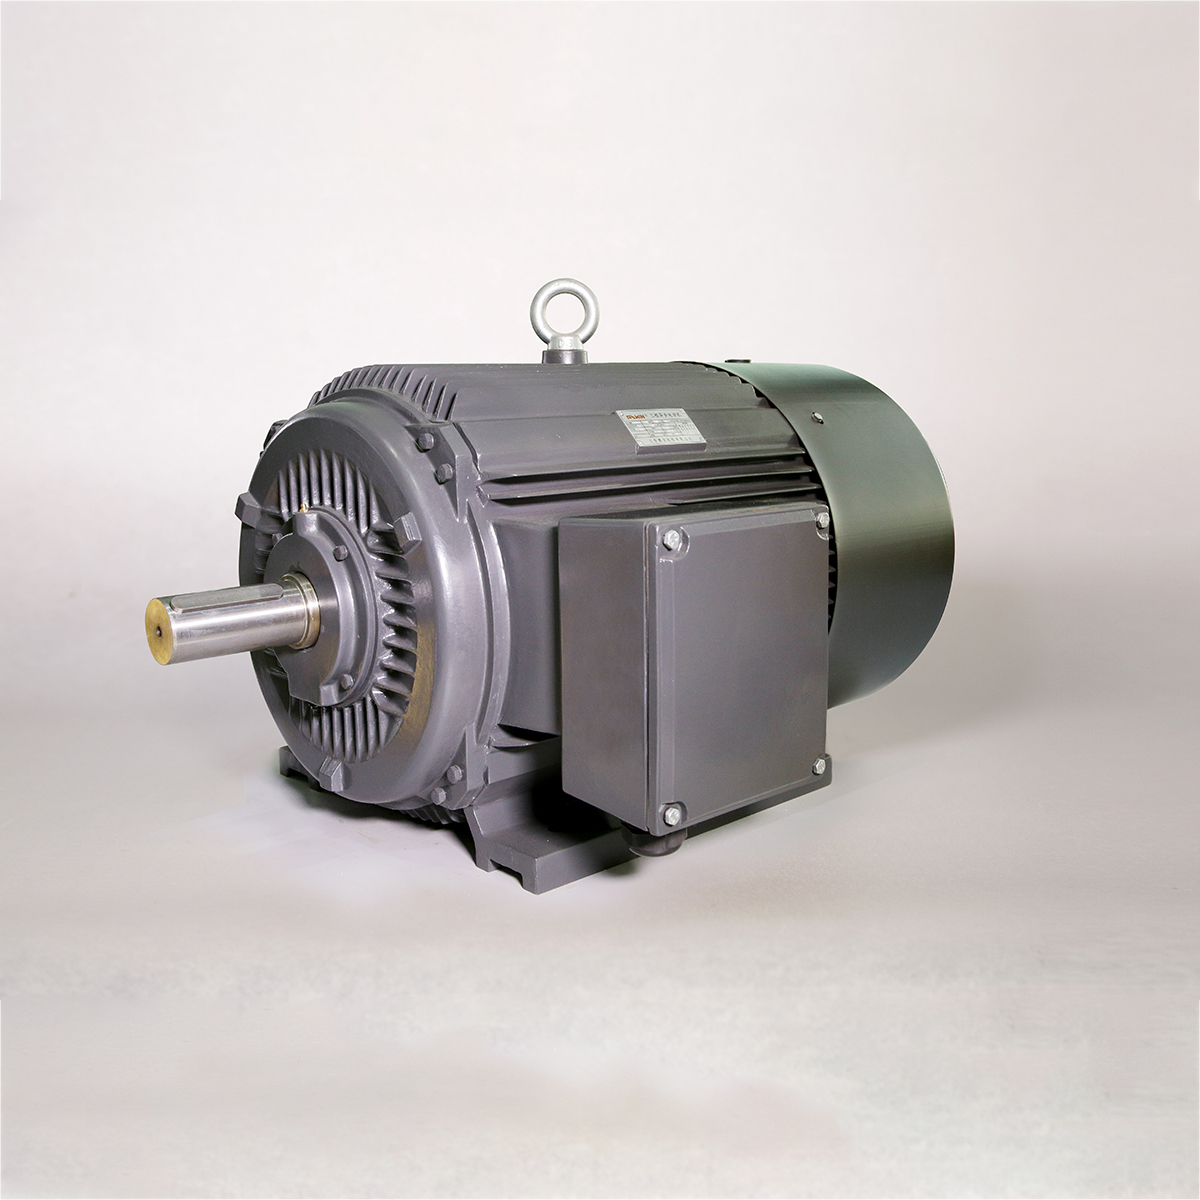 Low Voltage 3-Phase Asynchronous Motor with Cast Iron Housing Featured Image